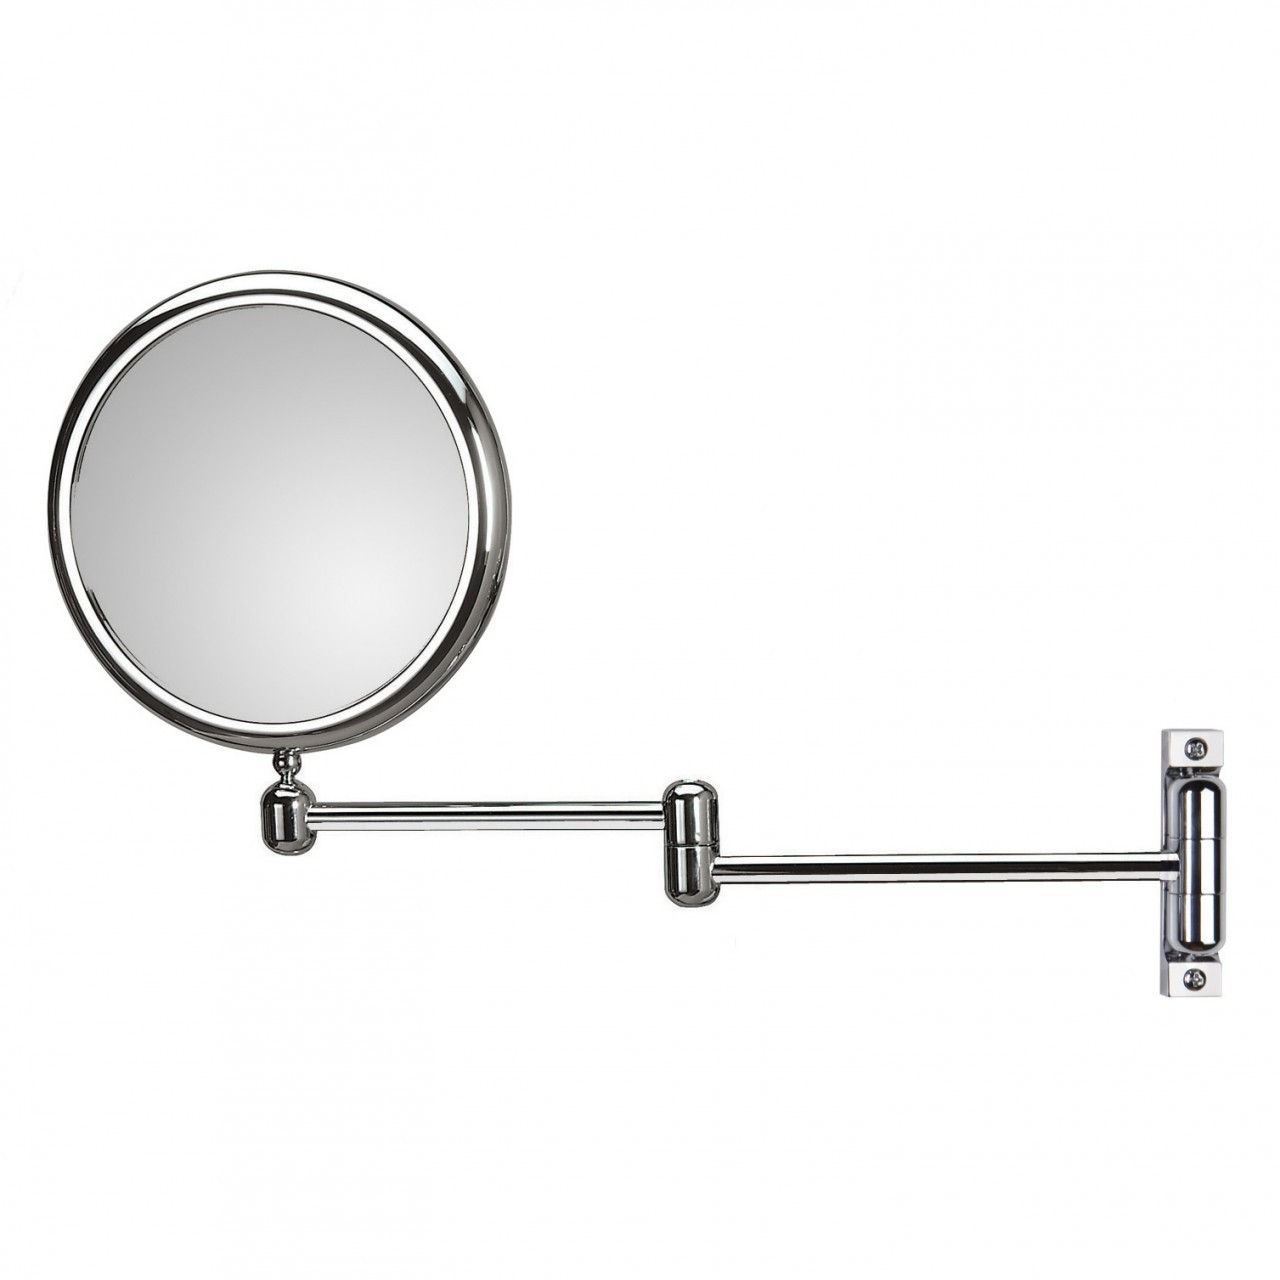 Doppiolo 40-2 by WS Bath Collections 9.1 Dia. x 14.6 Extension Magnifying Mirror, in Chromed Plated Brass Structure and Frame in Chromed Plated Abs